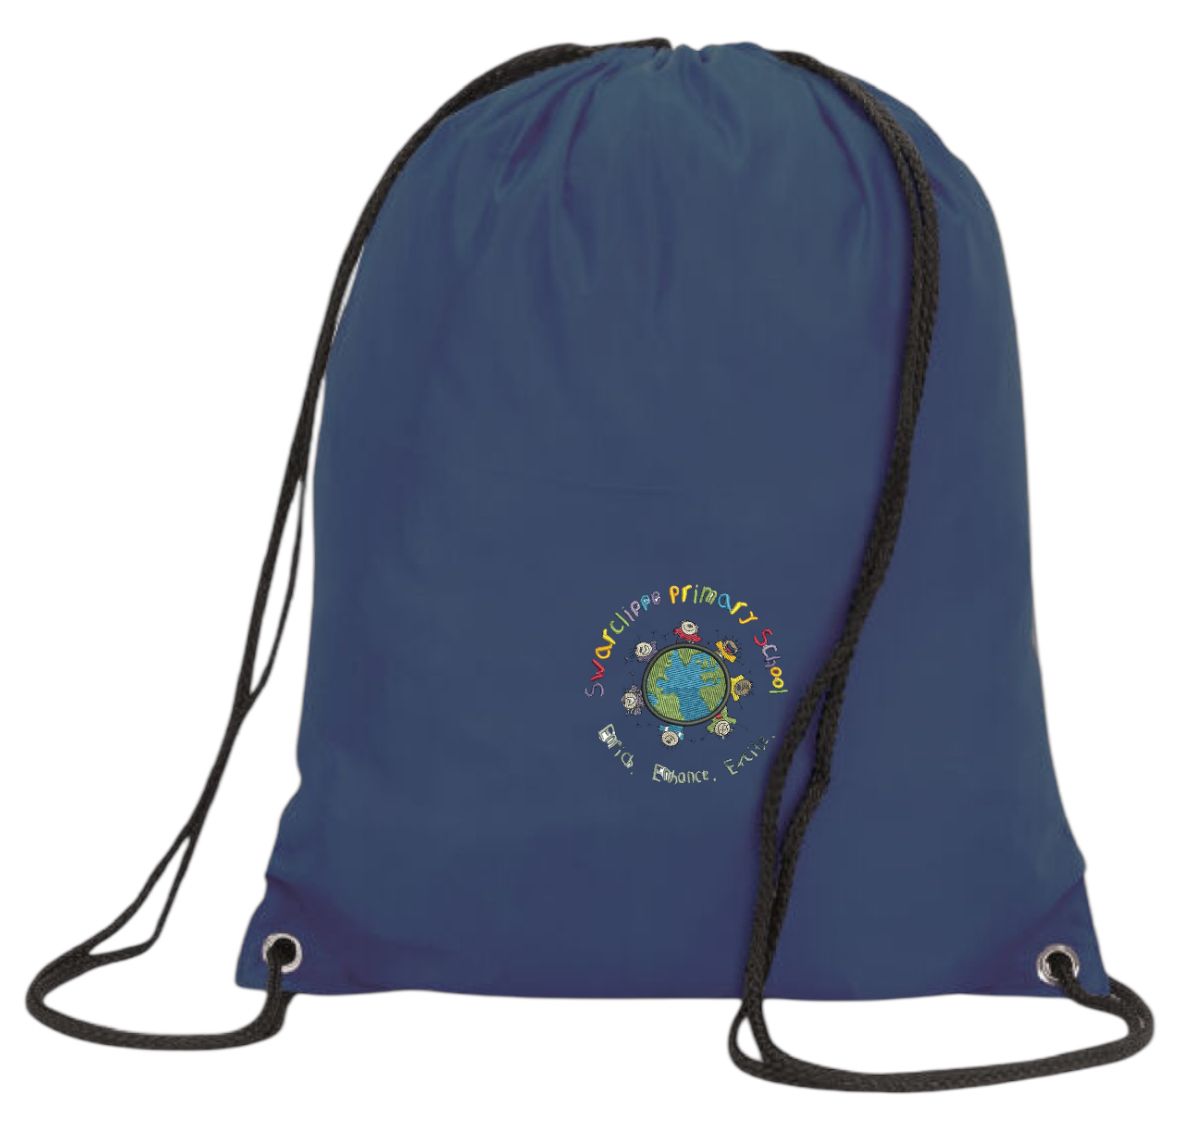 Swarcliffe Primary Gym Bag